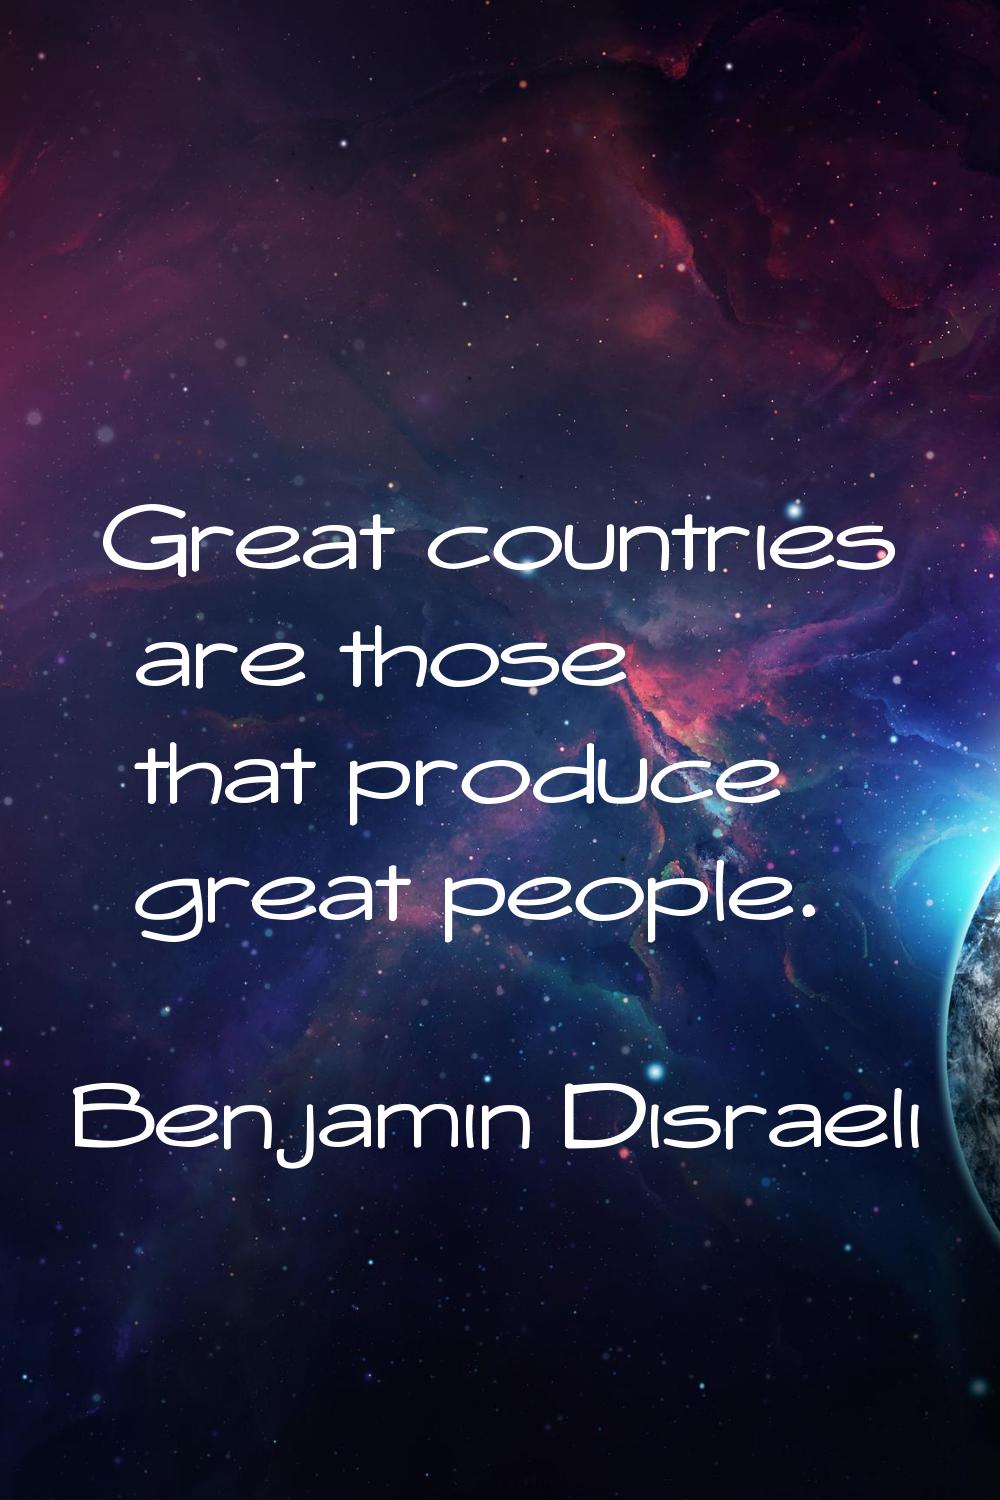 Great countries are those that produce great people.